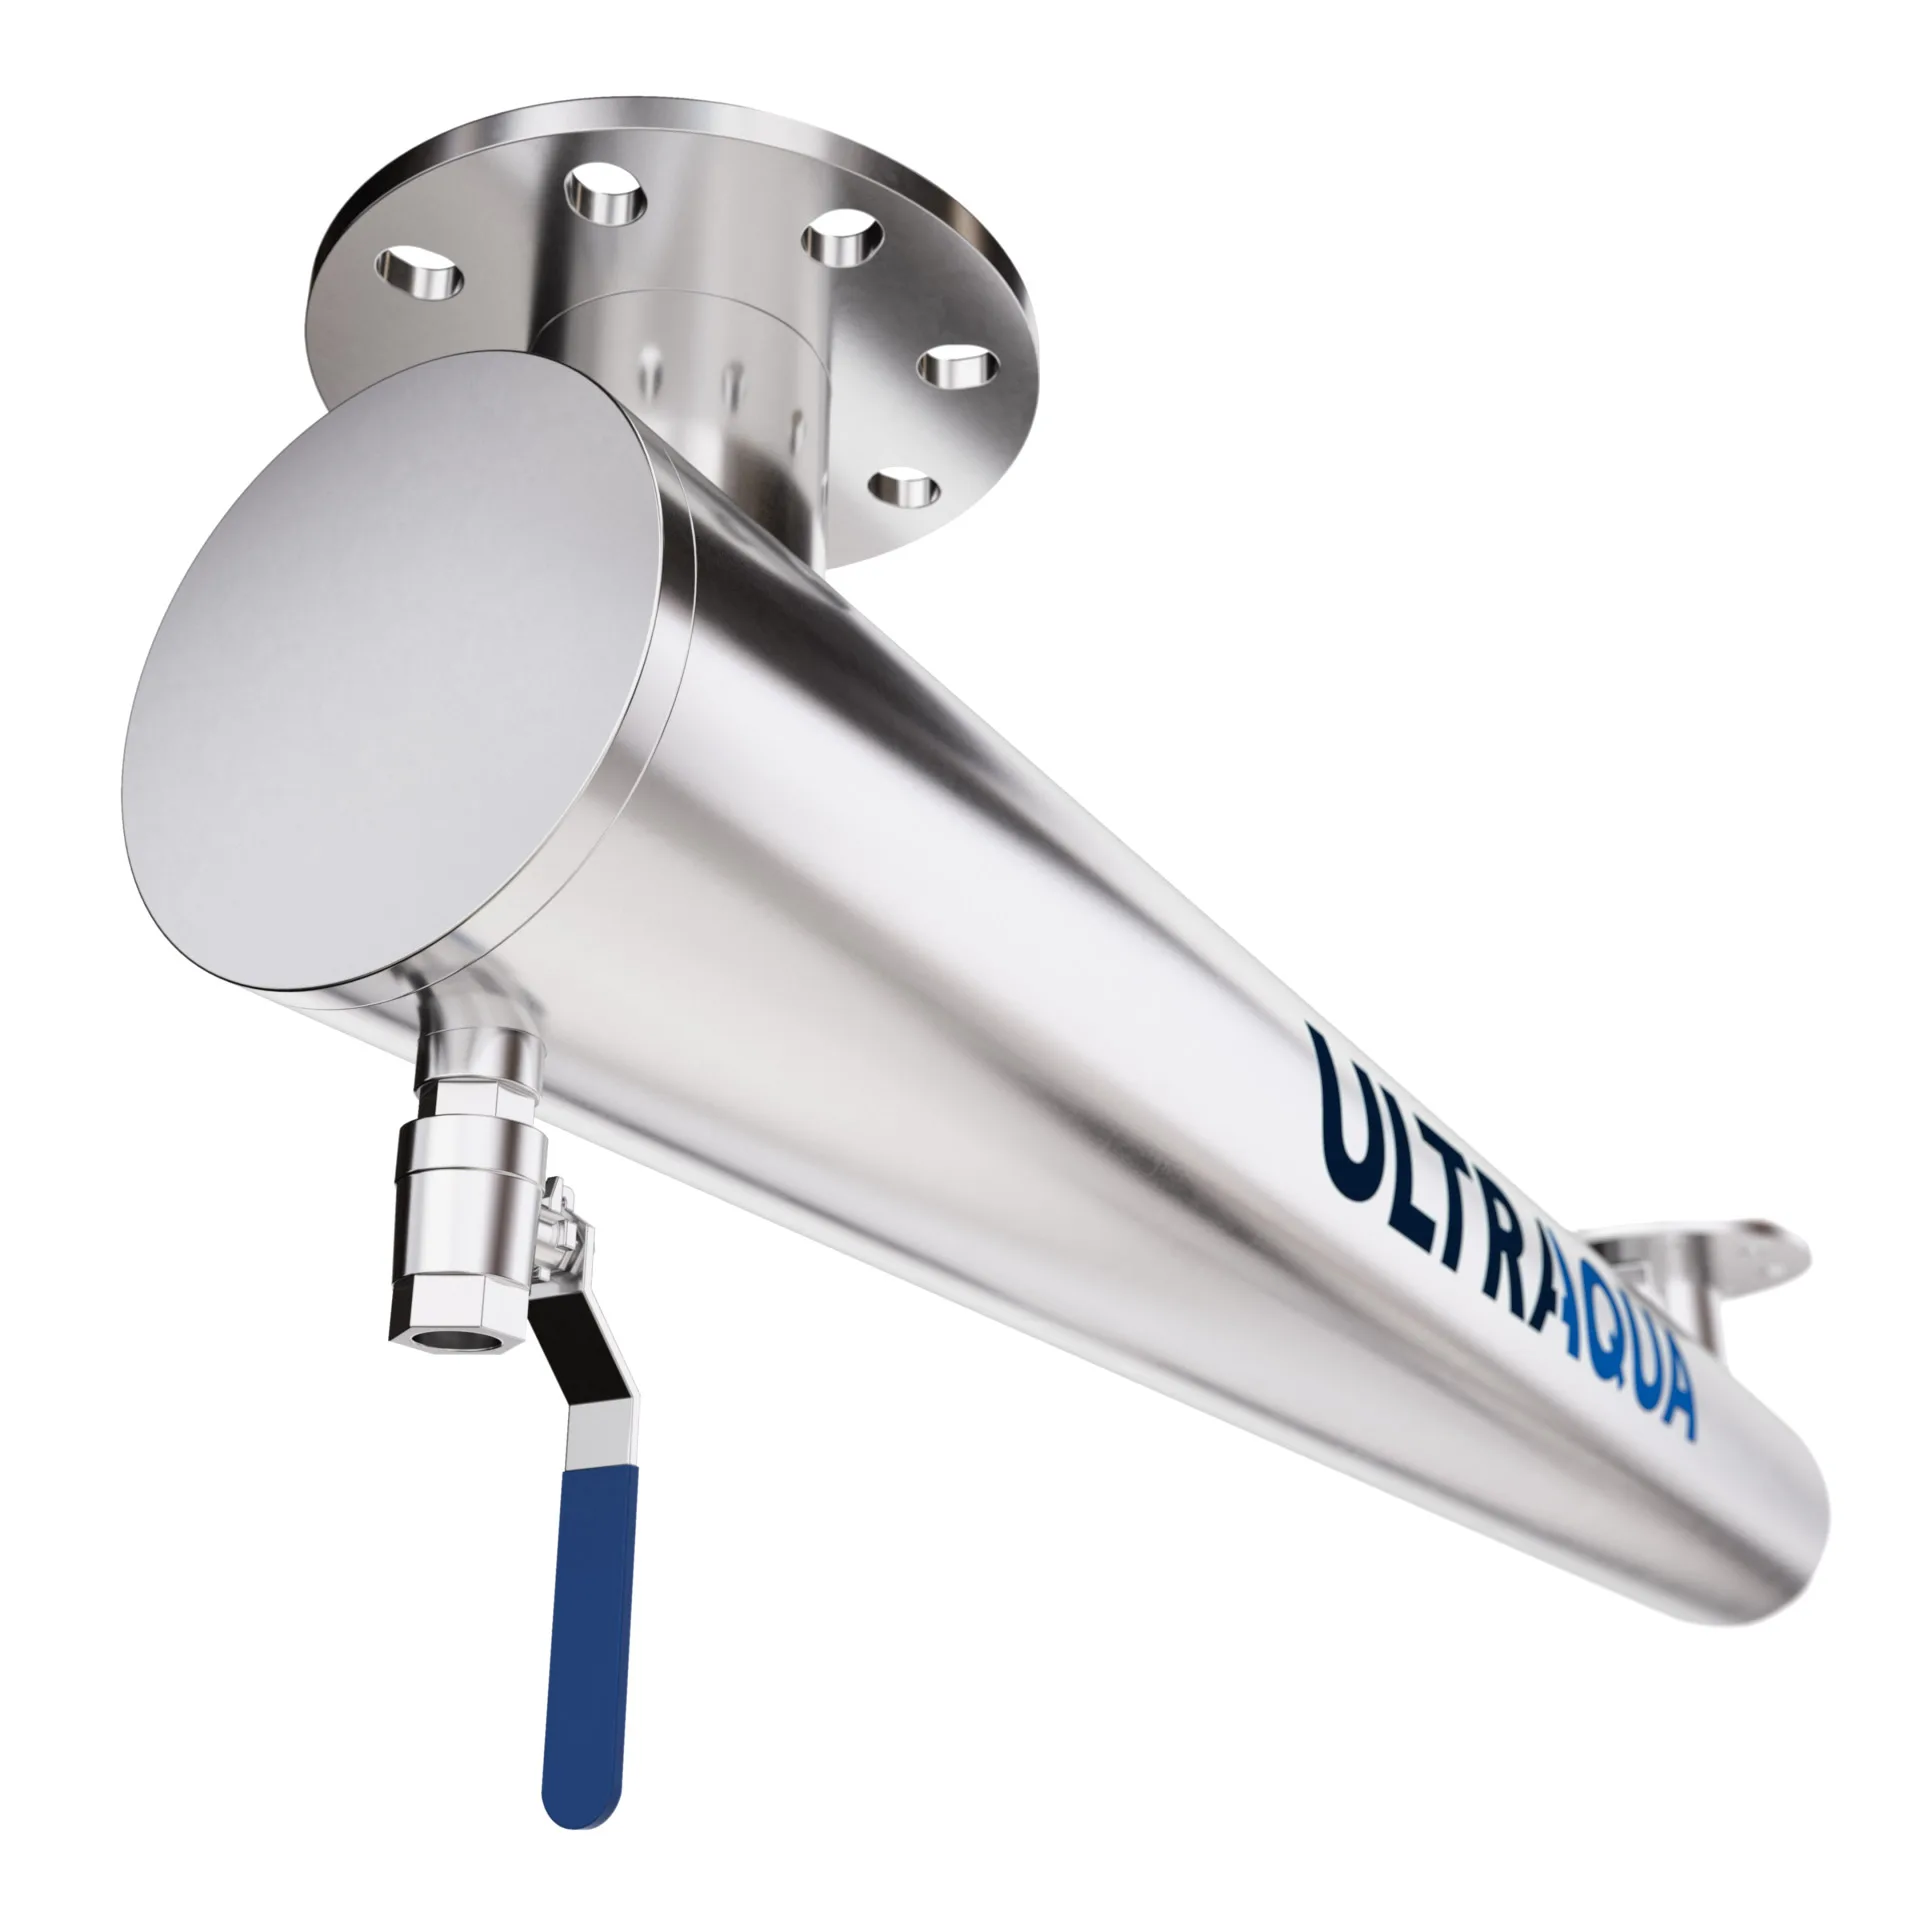 general water uv disinfection system